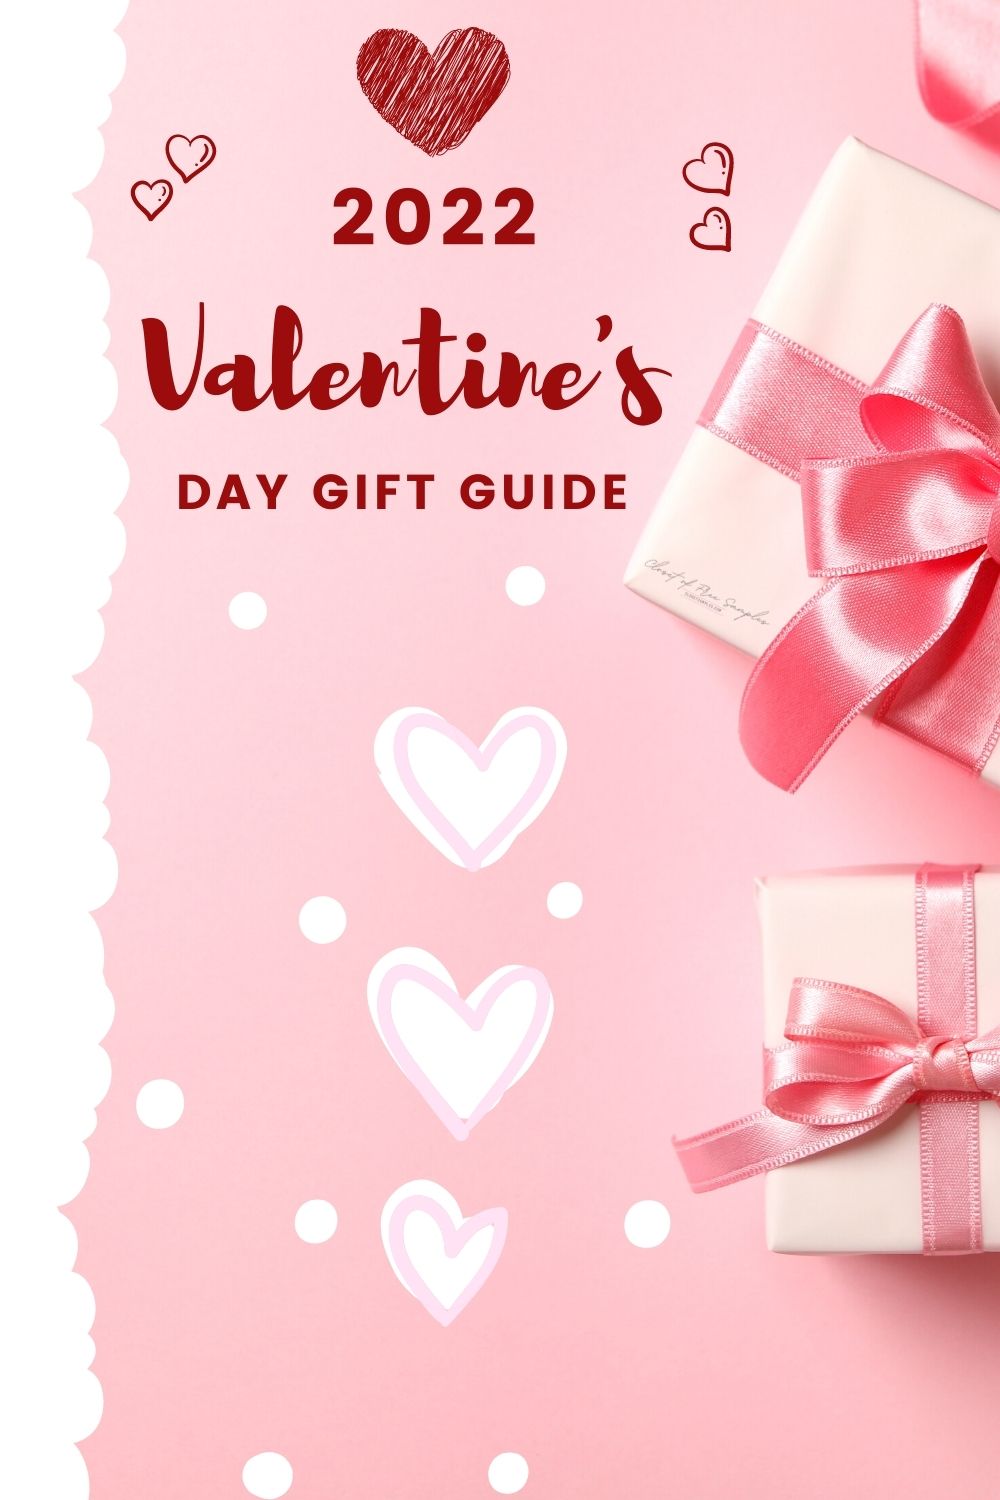 2022 Valentines Day Gift Guide Gift Ideas Closetsamples Pinterest